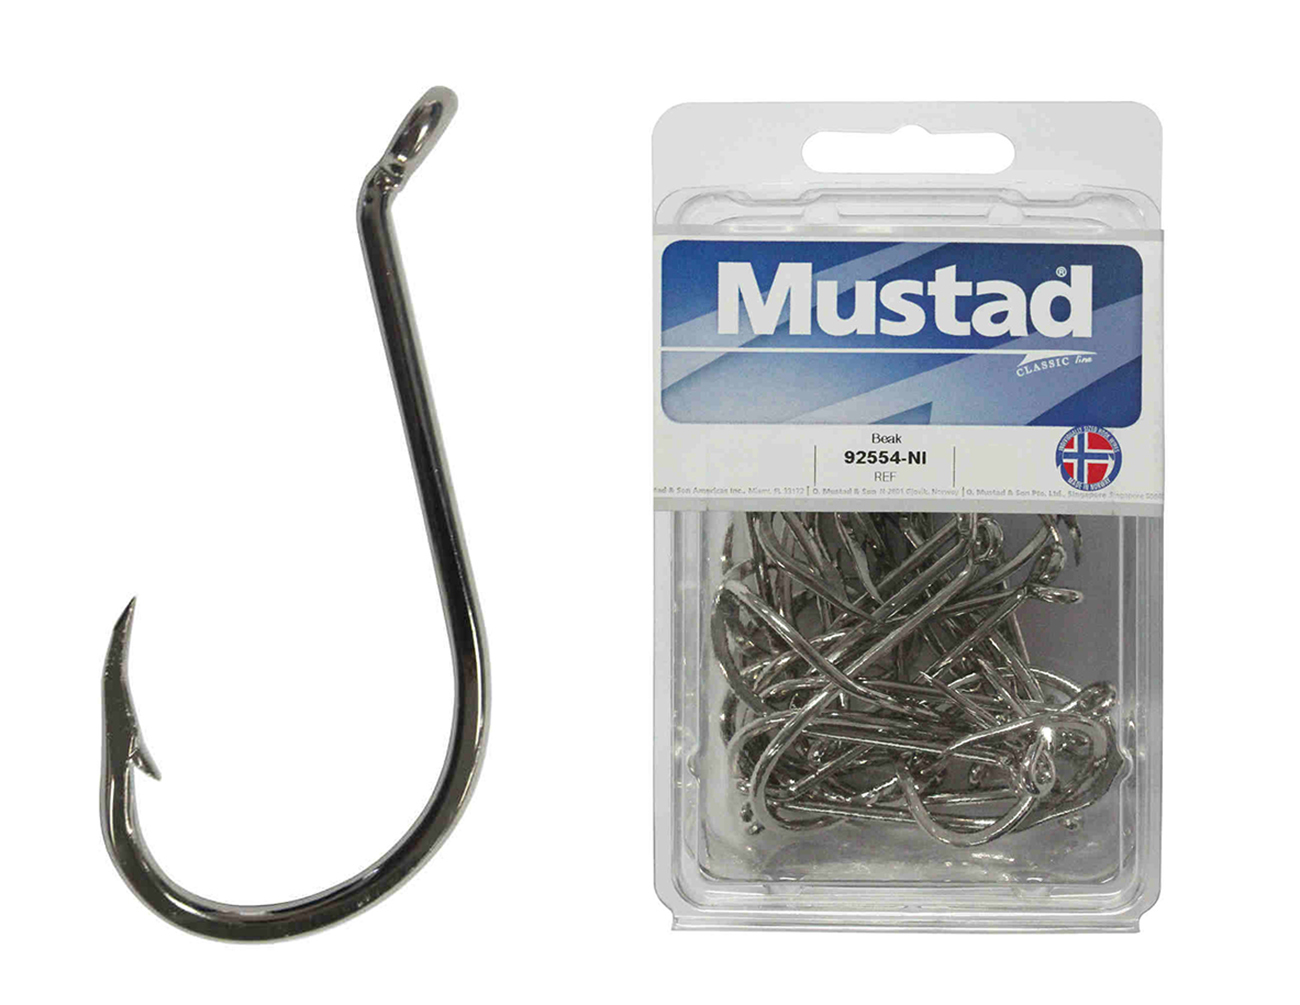 Mustad 92554npnr - Size 3/0 Qty 25 - Big Red X-Strong Chemically Sharpened